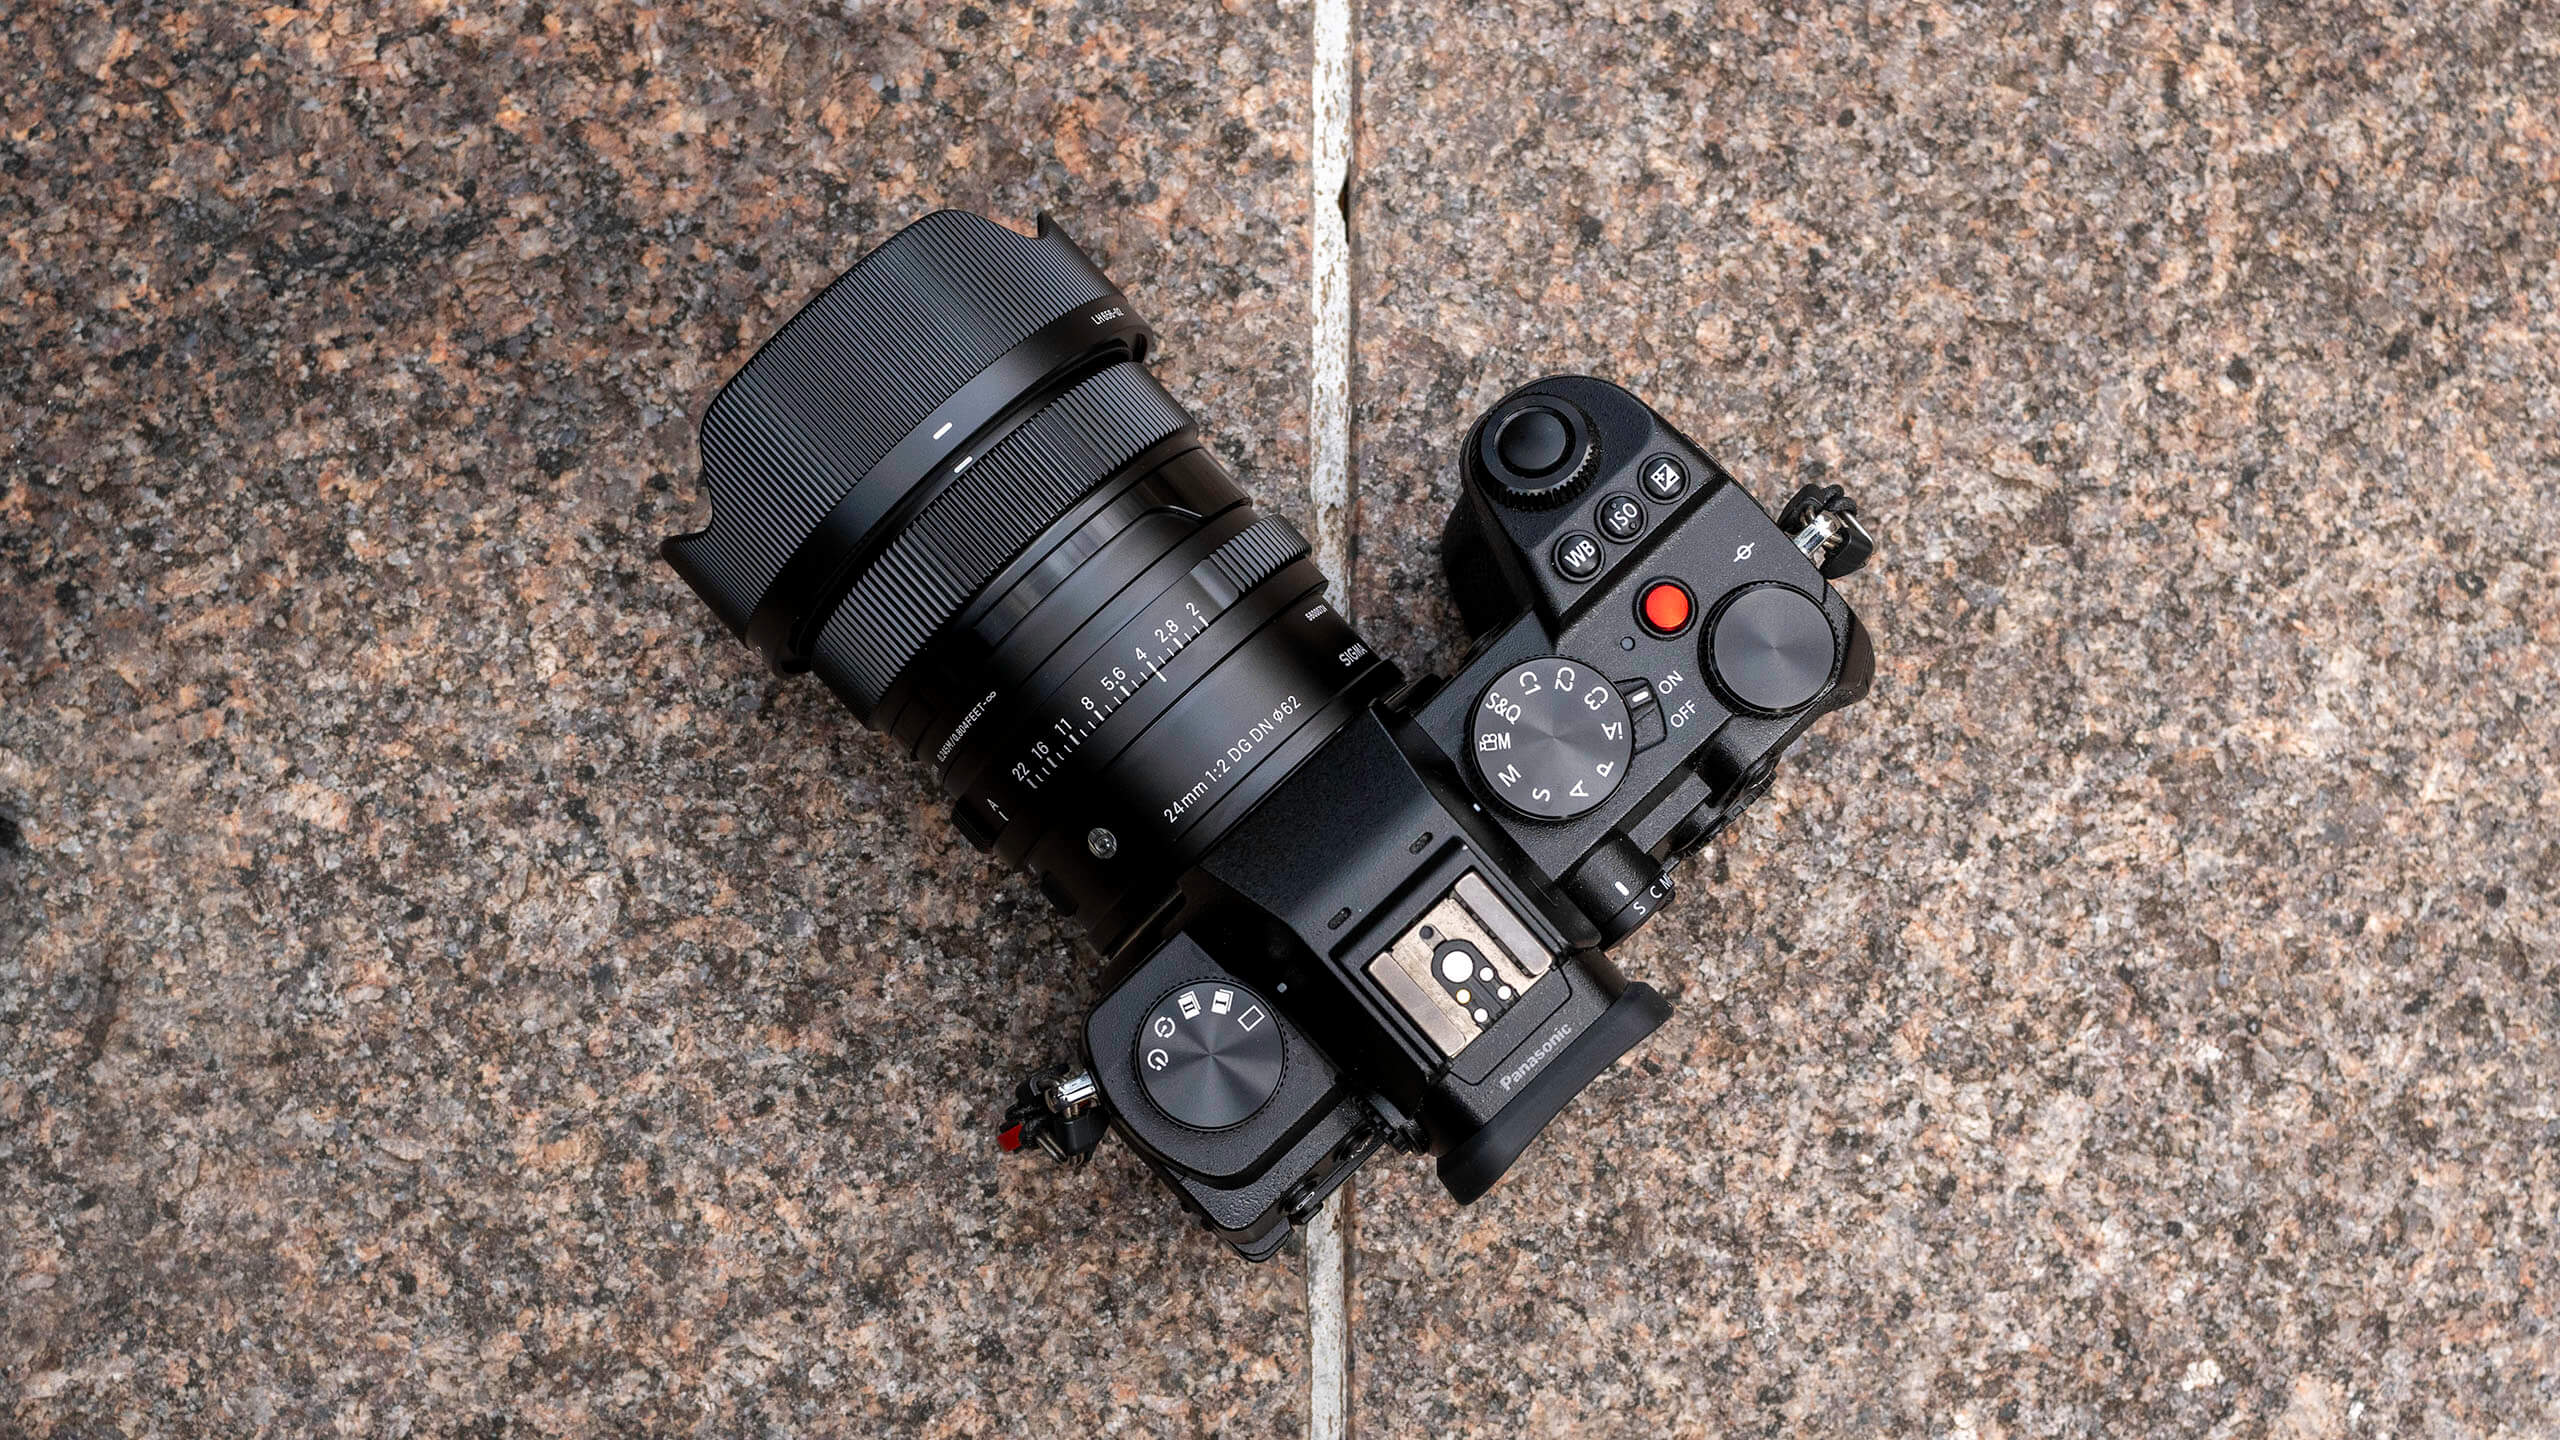 Sigma 24mm F/2 DG DN review: A solid wide prime for a decent price